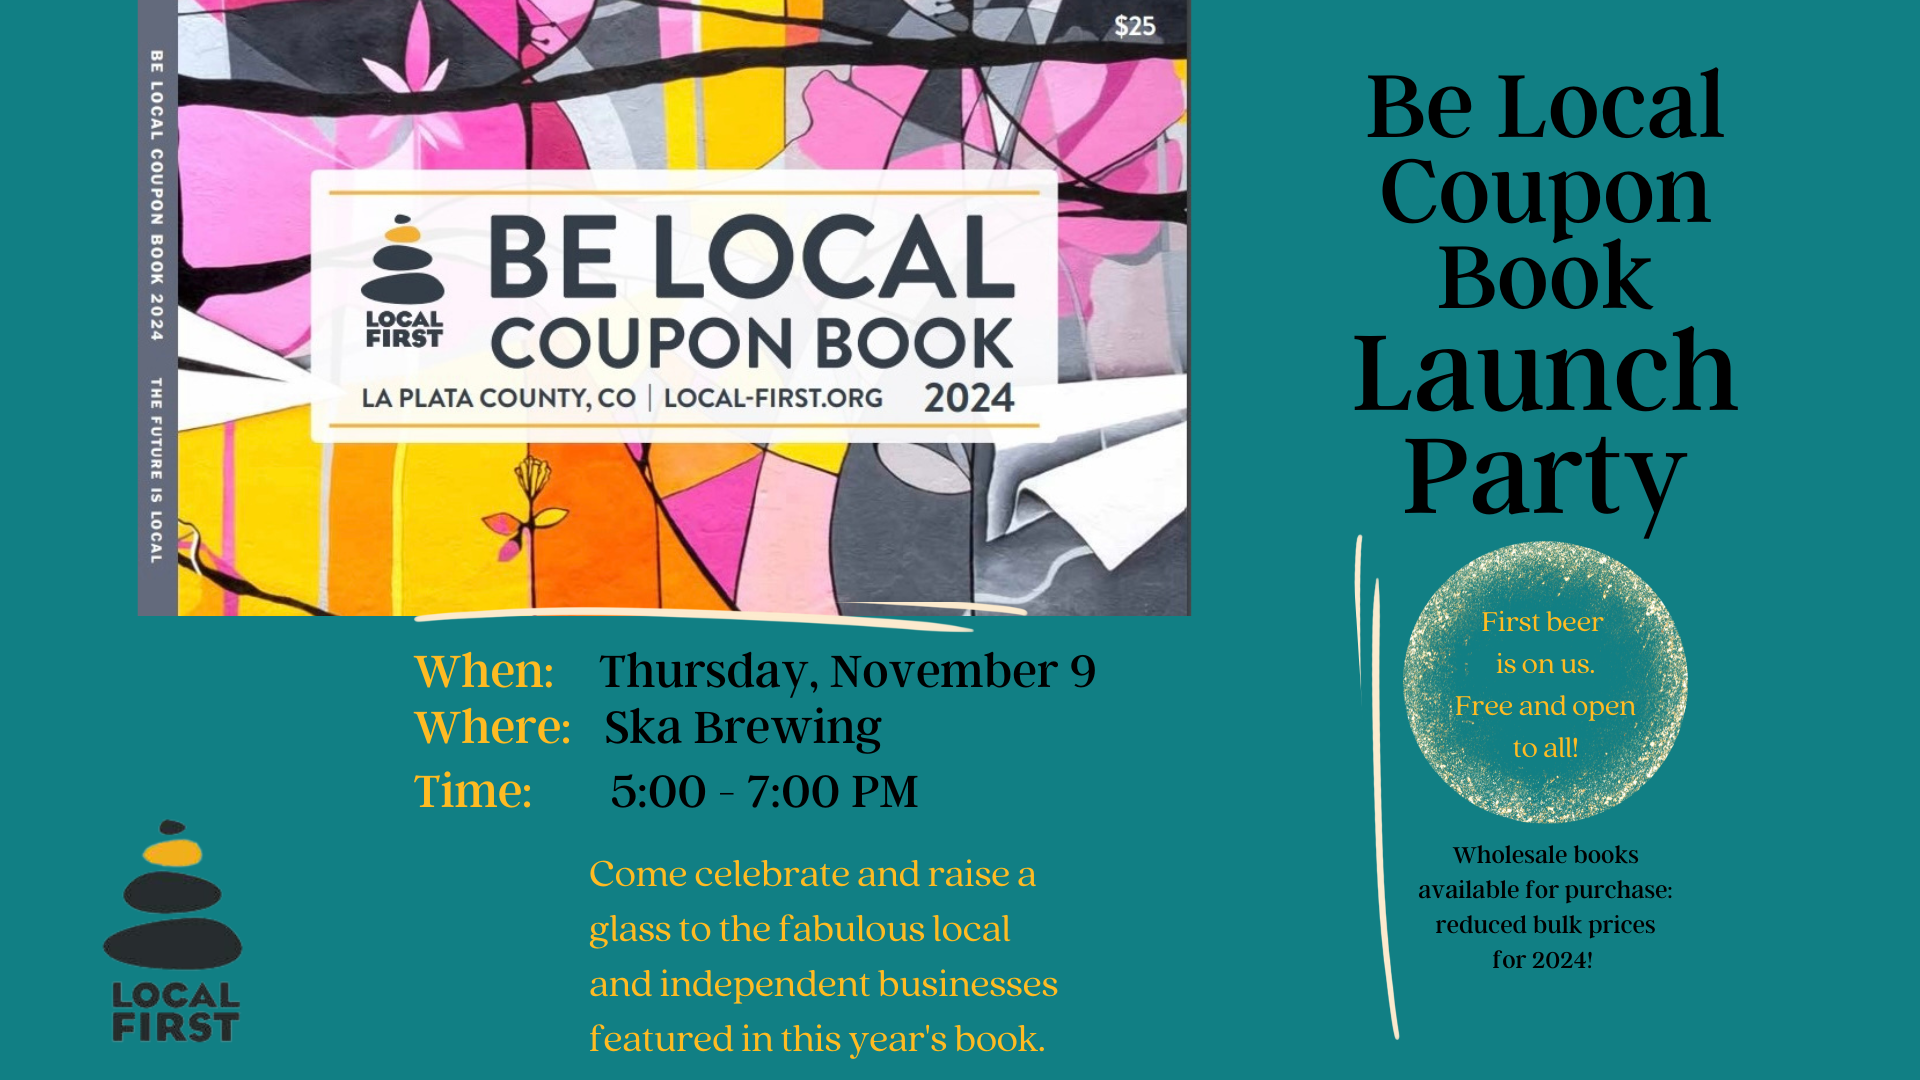 Join us for the 2023 Be Local Coupon Book Launch Party at Ska Brewing on November 9th!